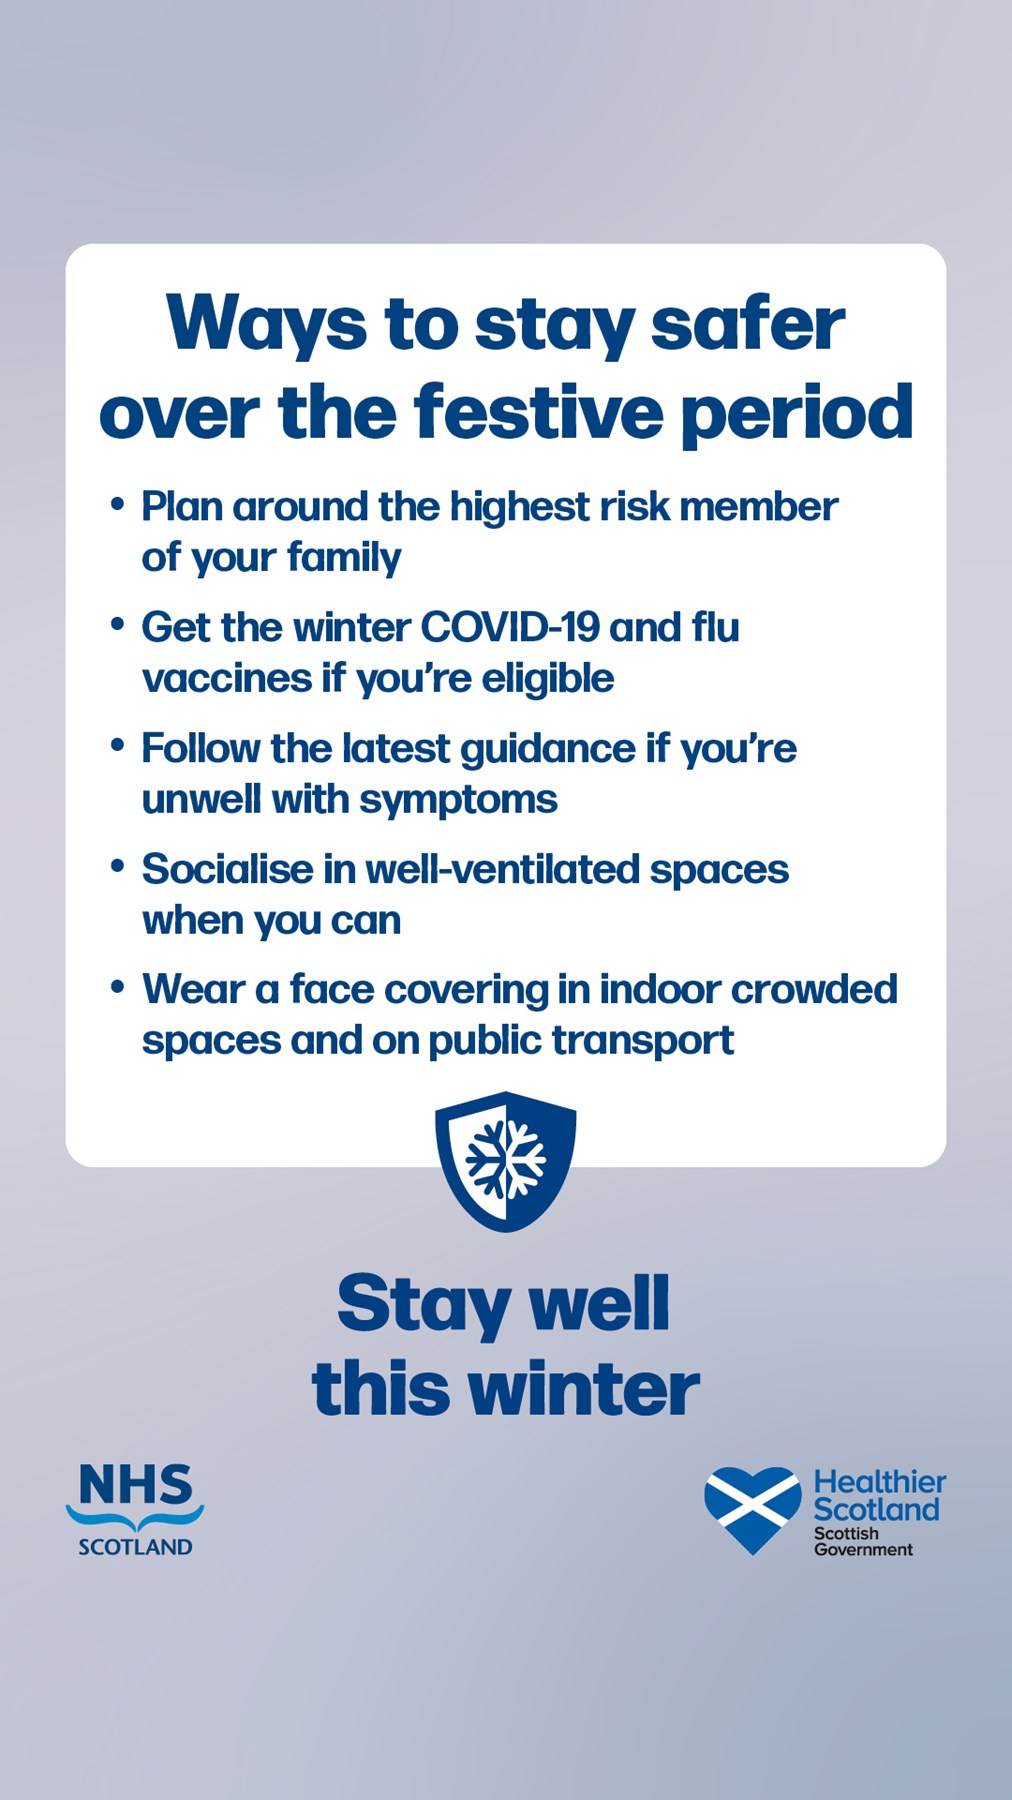 Graphic with text saying: "Ways to stay safer over the festive period.

* Plan around the highest risk member of your family.
* Get the winter COVID-19 and flu vaccines if you're eligible
* Follow the latest guidance if you're unwell with symptoms
* Socialist in well-ventilated spaces when you can
* Wear a face covering in indoor crowded spaces and on public transport.

Then the text "Stay well this winter" with the logos for NHS Scotland and Healthier Scotland Scottish Government.